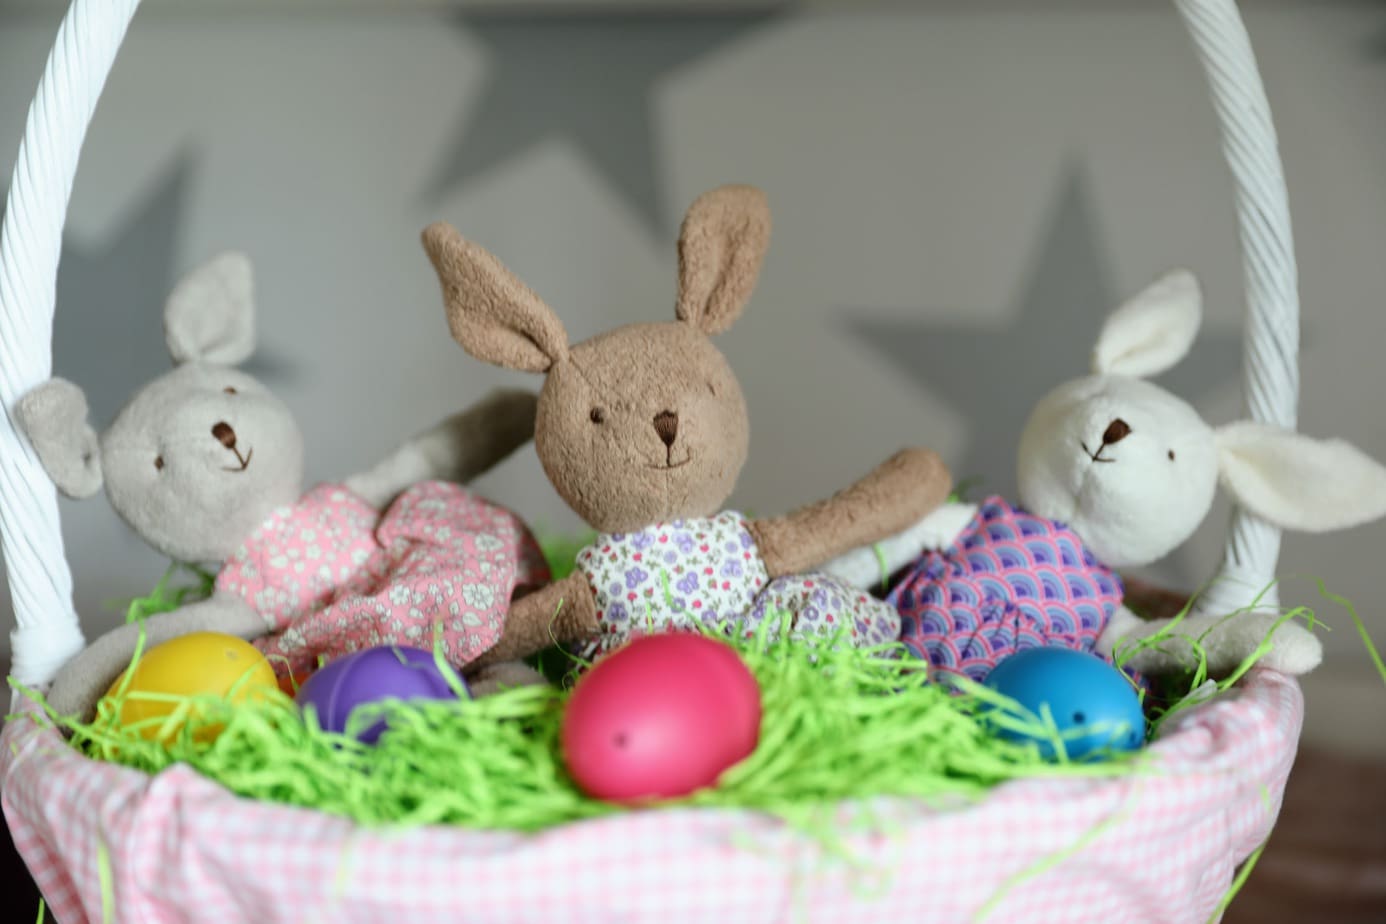 Apple Park Plush Bunnies For Easter | Stroller In The City